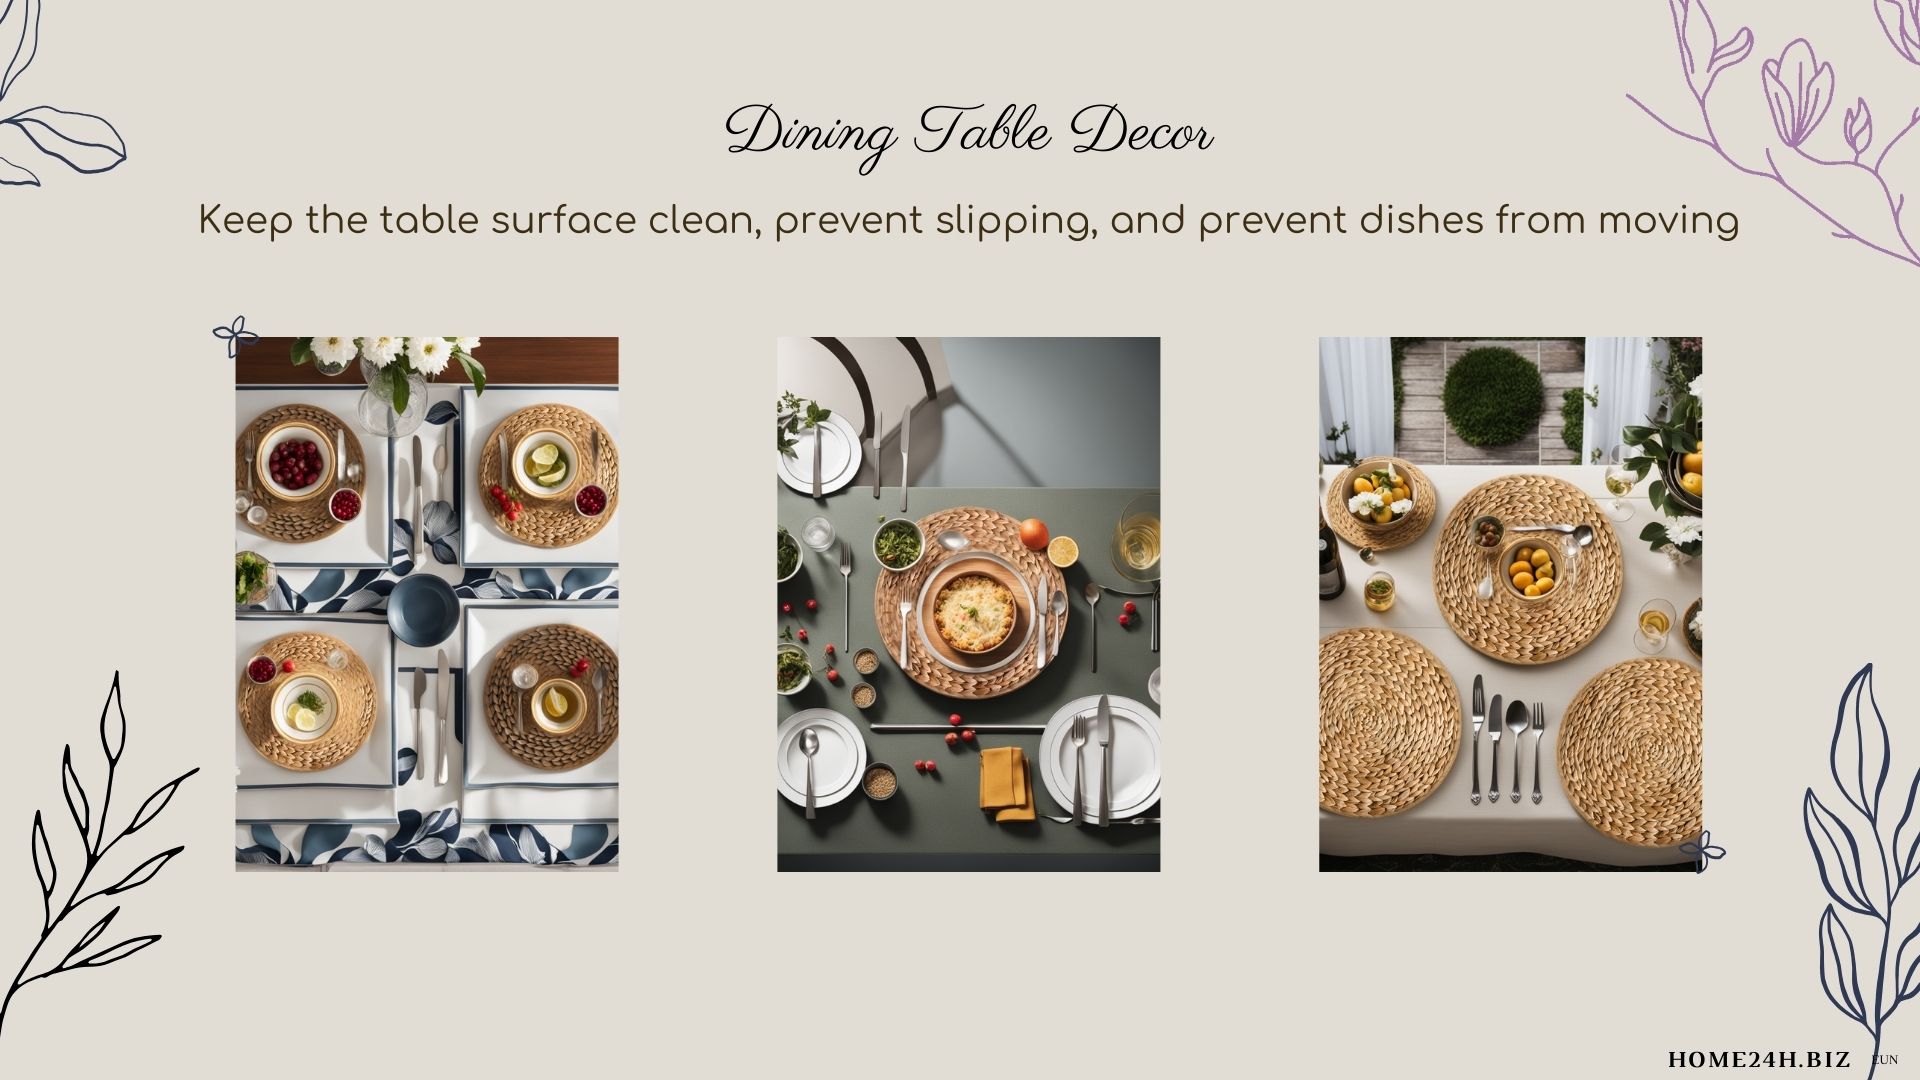 Usage Of Placemats, Tablemats Crafted From Natural Materials To Dining Table Decor